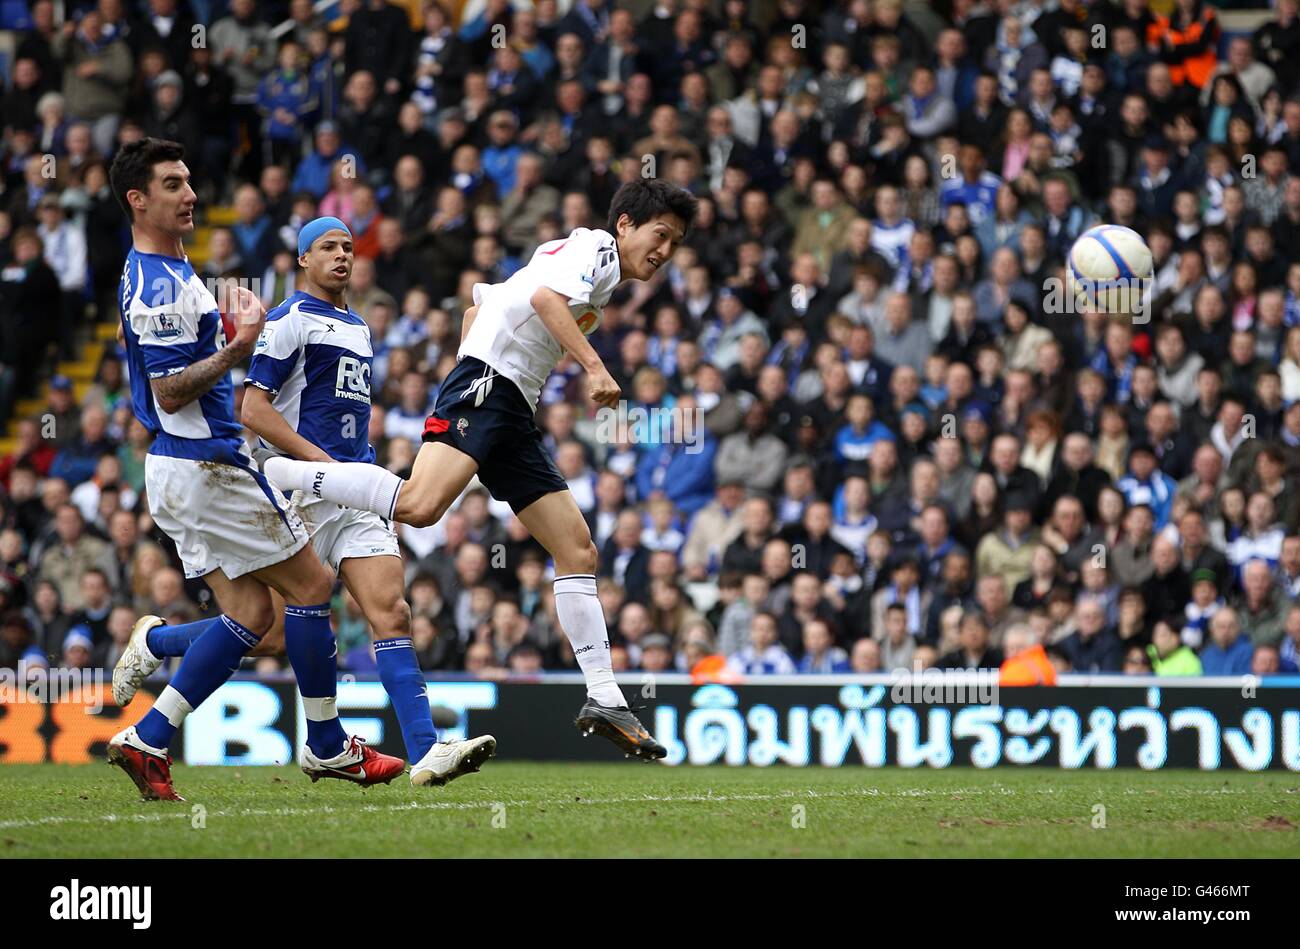 Soccer - FA Cup - Sixth Round - Birmingham City v Bolton Wanderers - St Andrew's. Bolton Wanderers' Chung-Yong Lee (right) scores their third goal Stock Photo